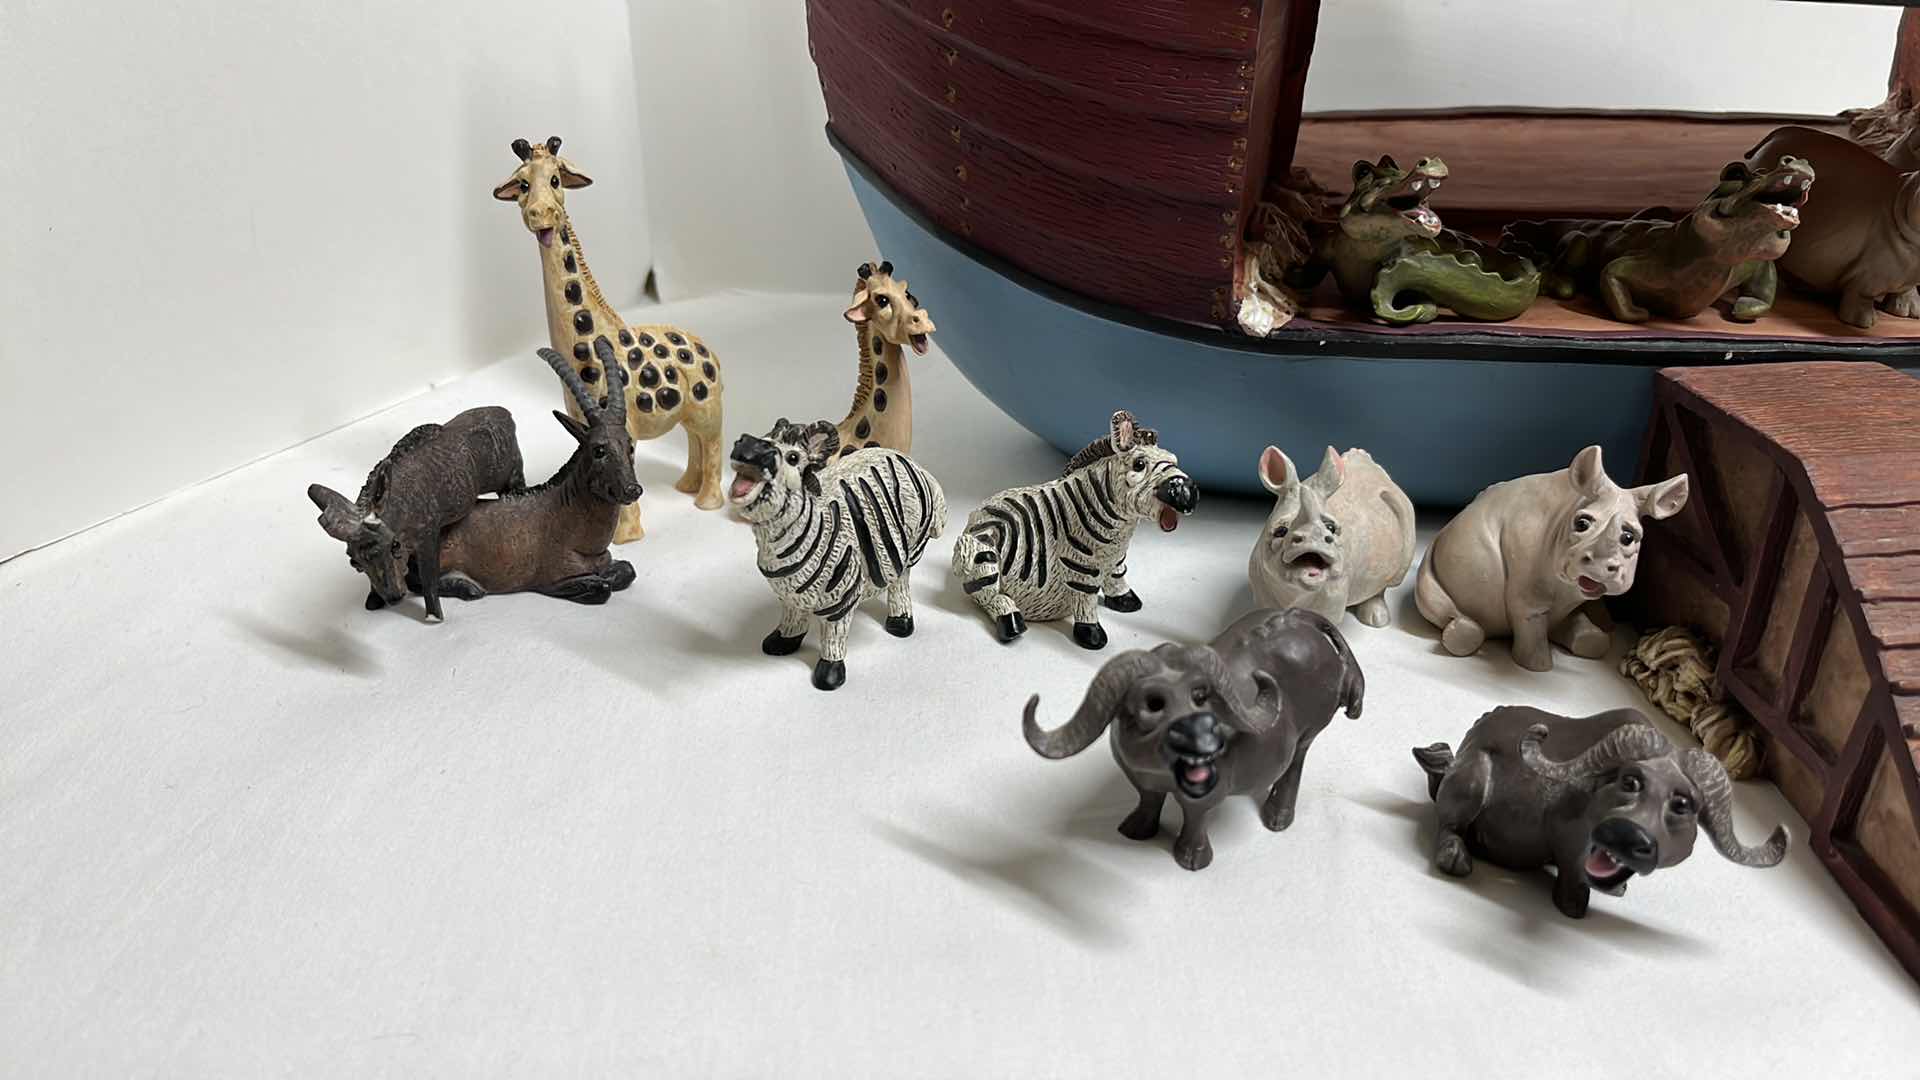 Photo 4 of NOAH’S ARK S.S. HOLY HERD COLLECTIBLES W NOAH & HIS WIFE & 34 ANIMAL FIGURINES 8.25” X 18.5” H12.5”